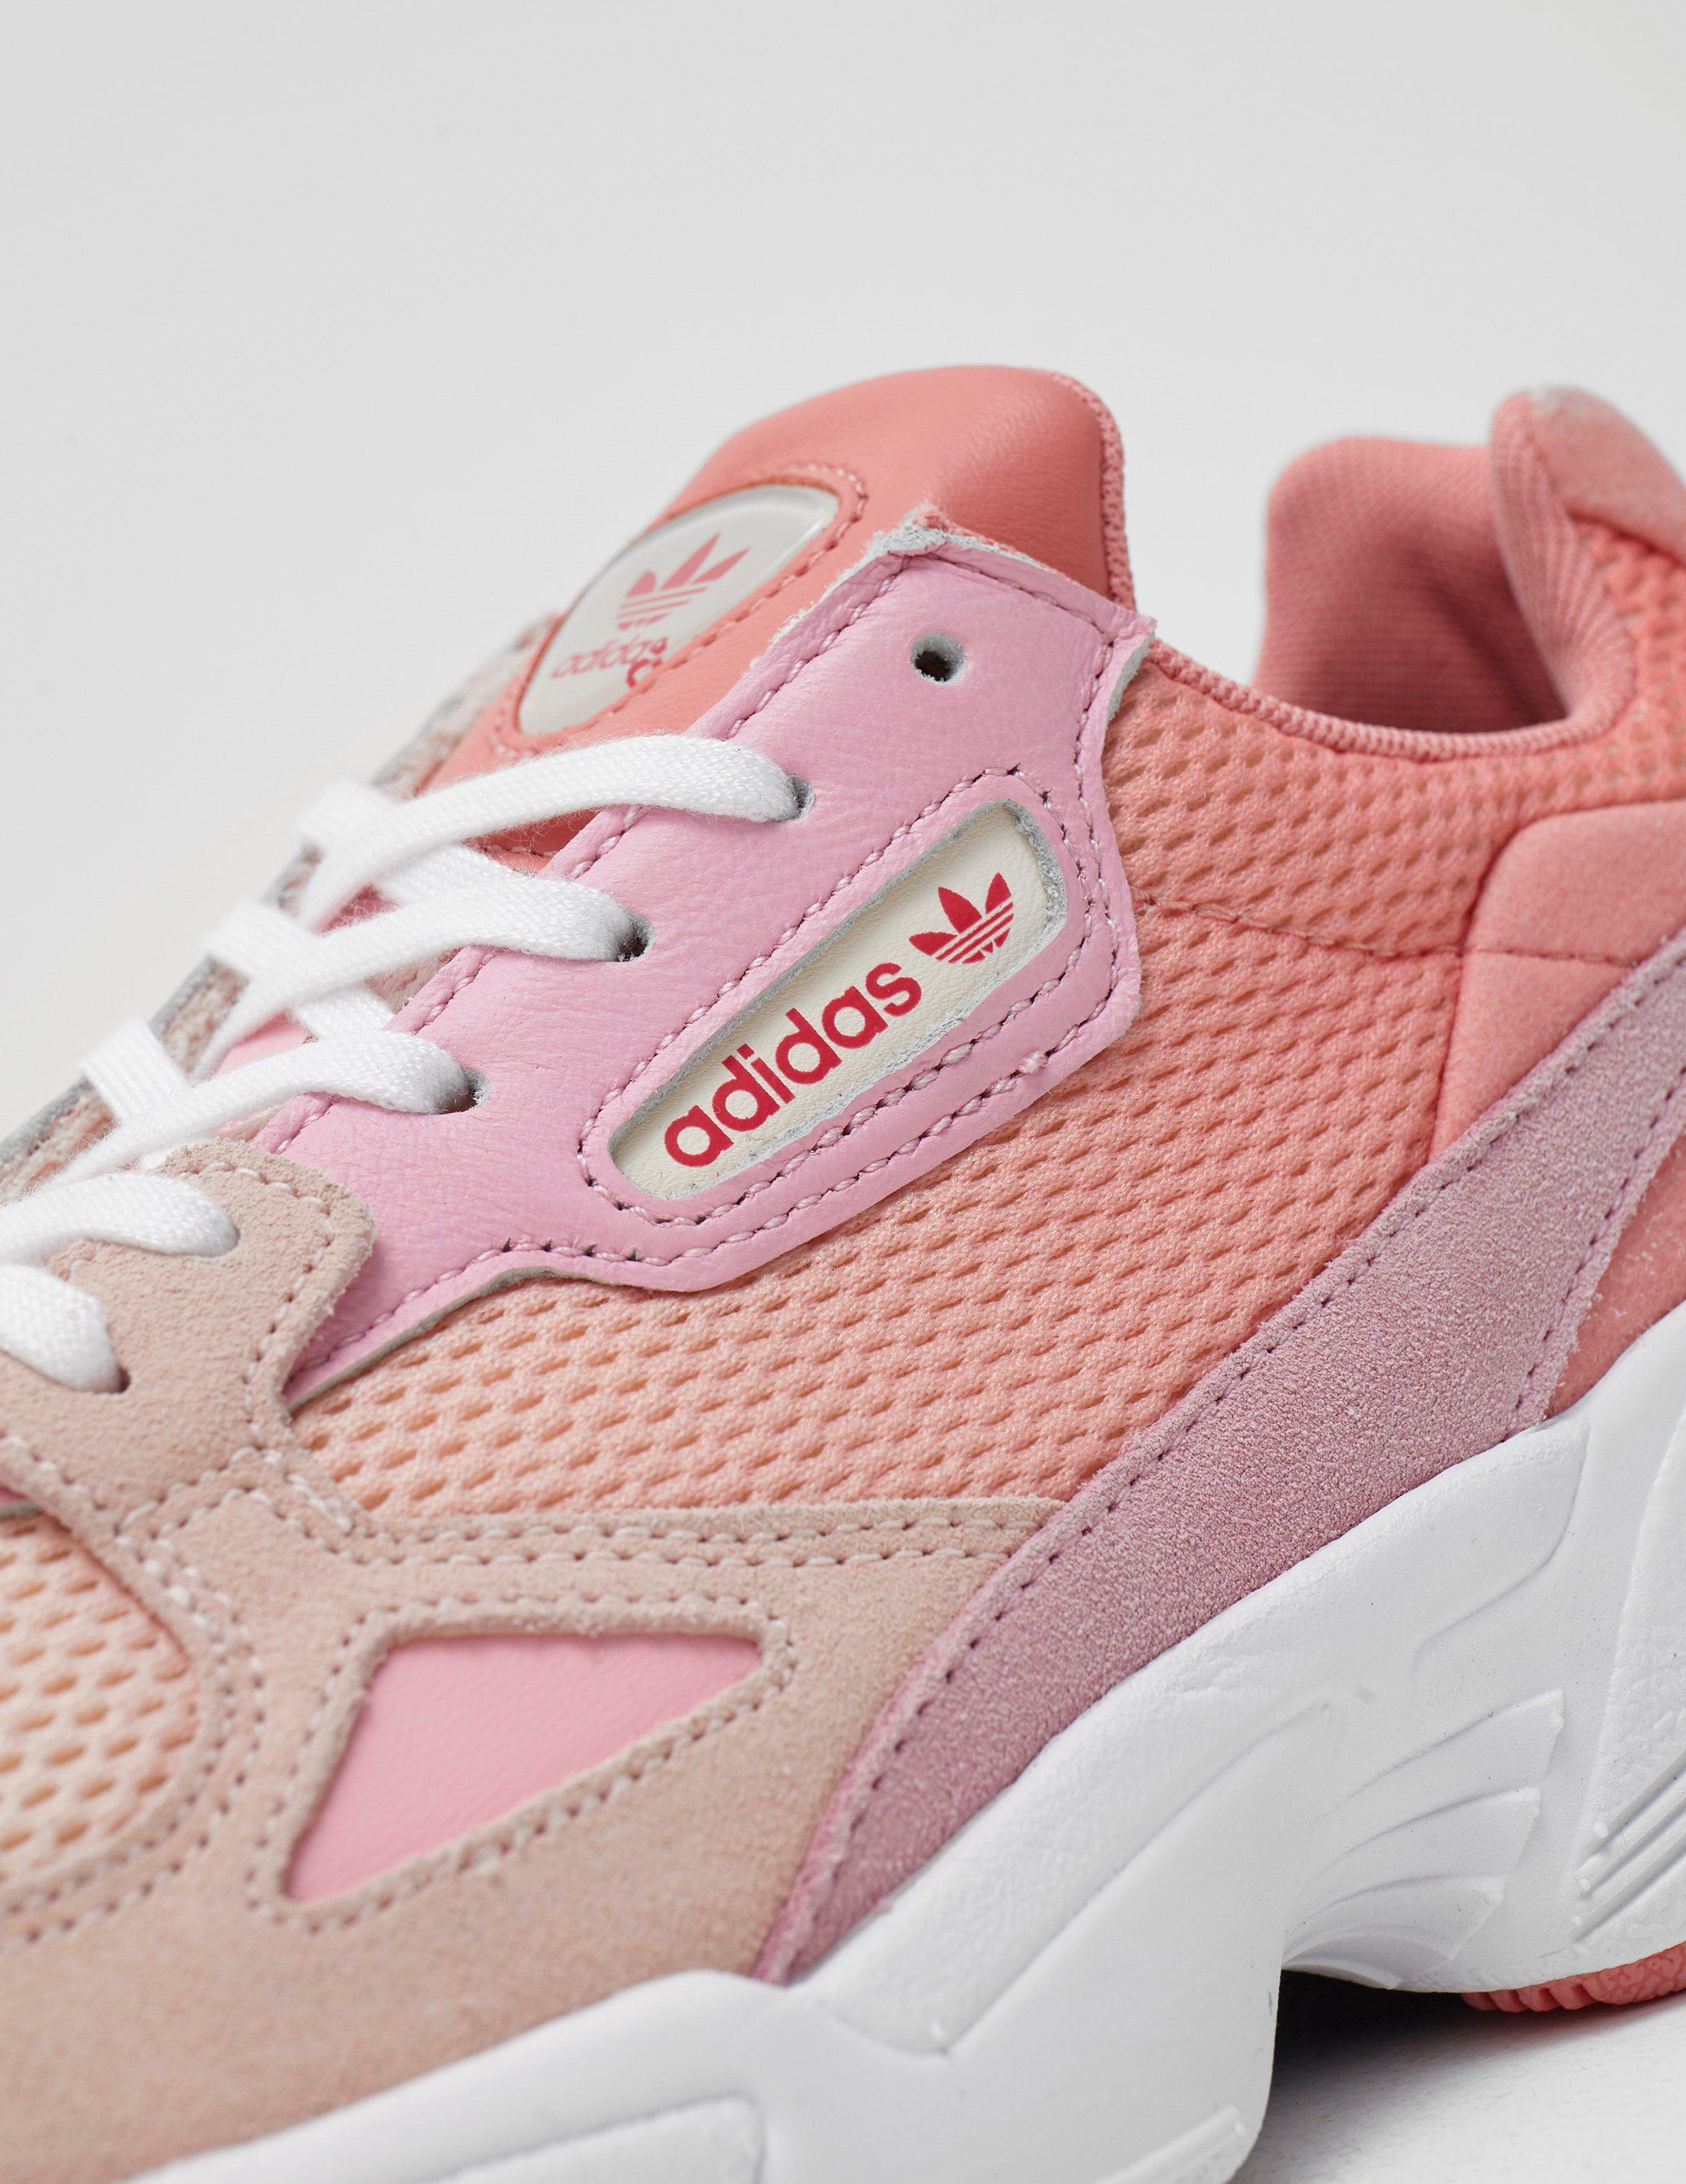 adidas Originals Leather Falcon in Peach/Peach (Pink) - Save 53% | Lyst